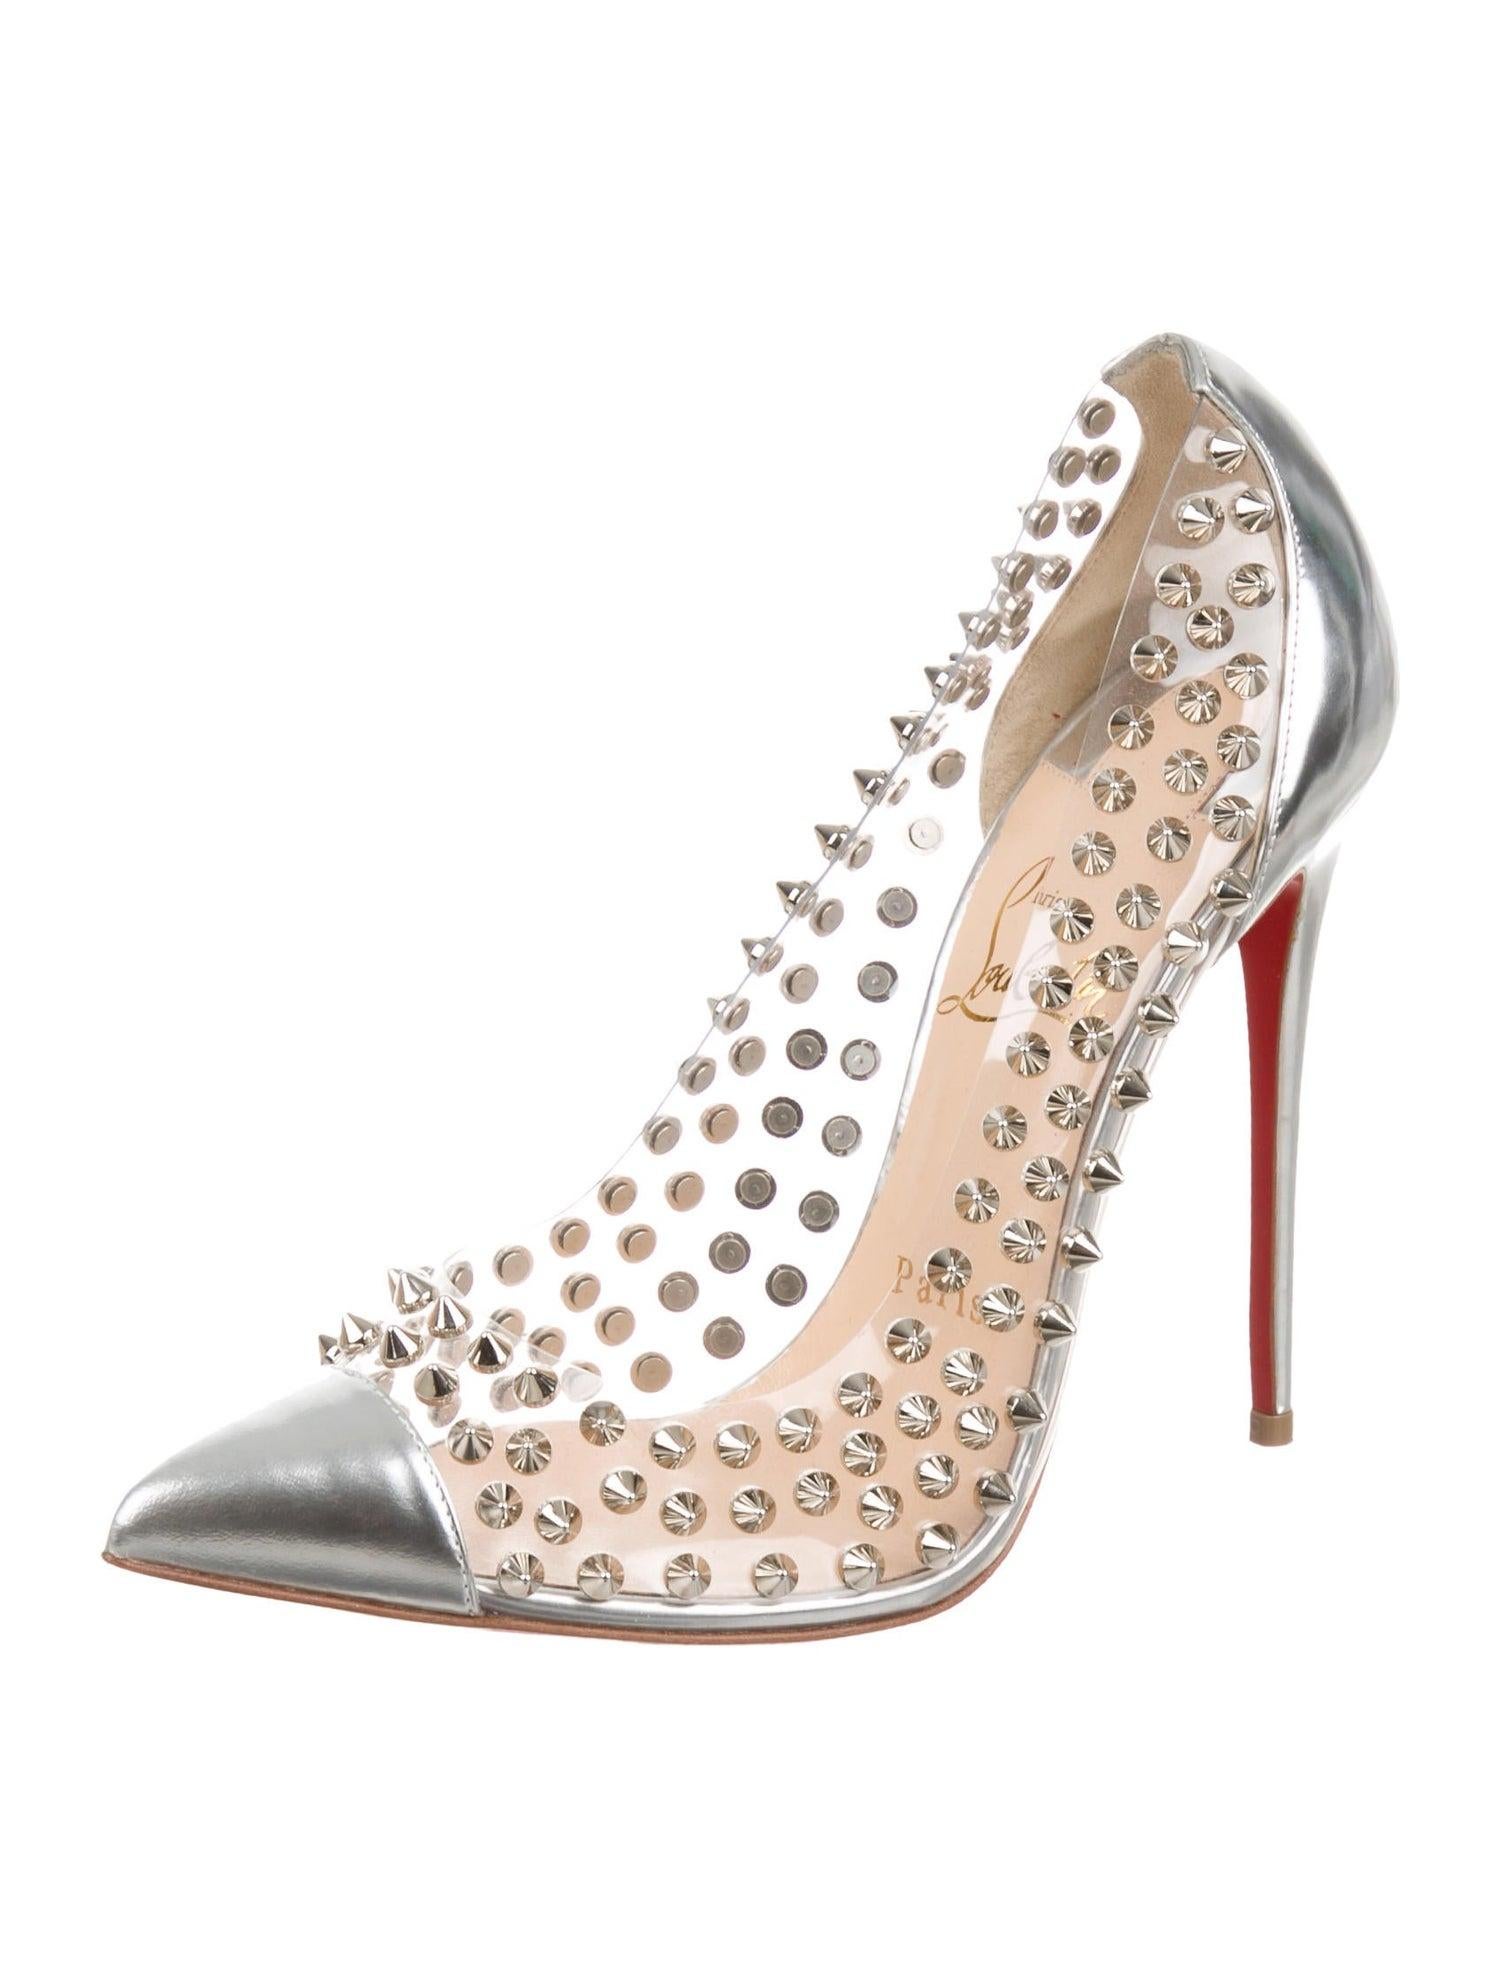 Christian Louboutin NEW Silver Leather PVC Clear Metal Pumps Heels in Box

Size IT 37.5
Leather
PVC
Metal
Silver tone hardware
Slip on
Made in Italy
Heel height 4.5